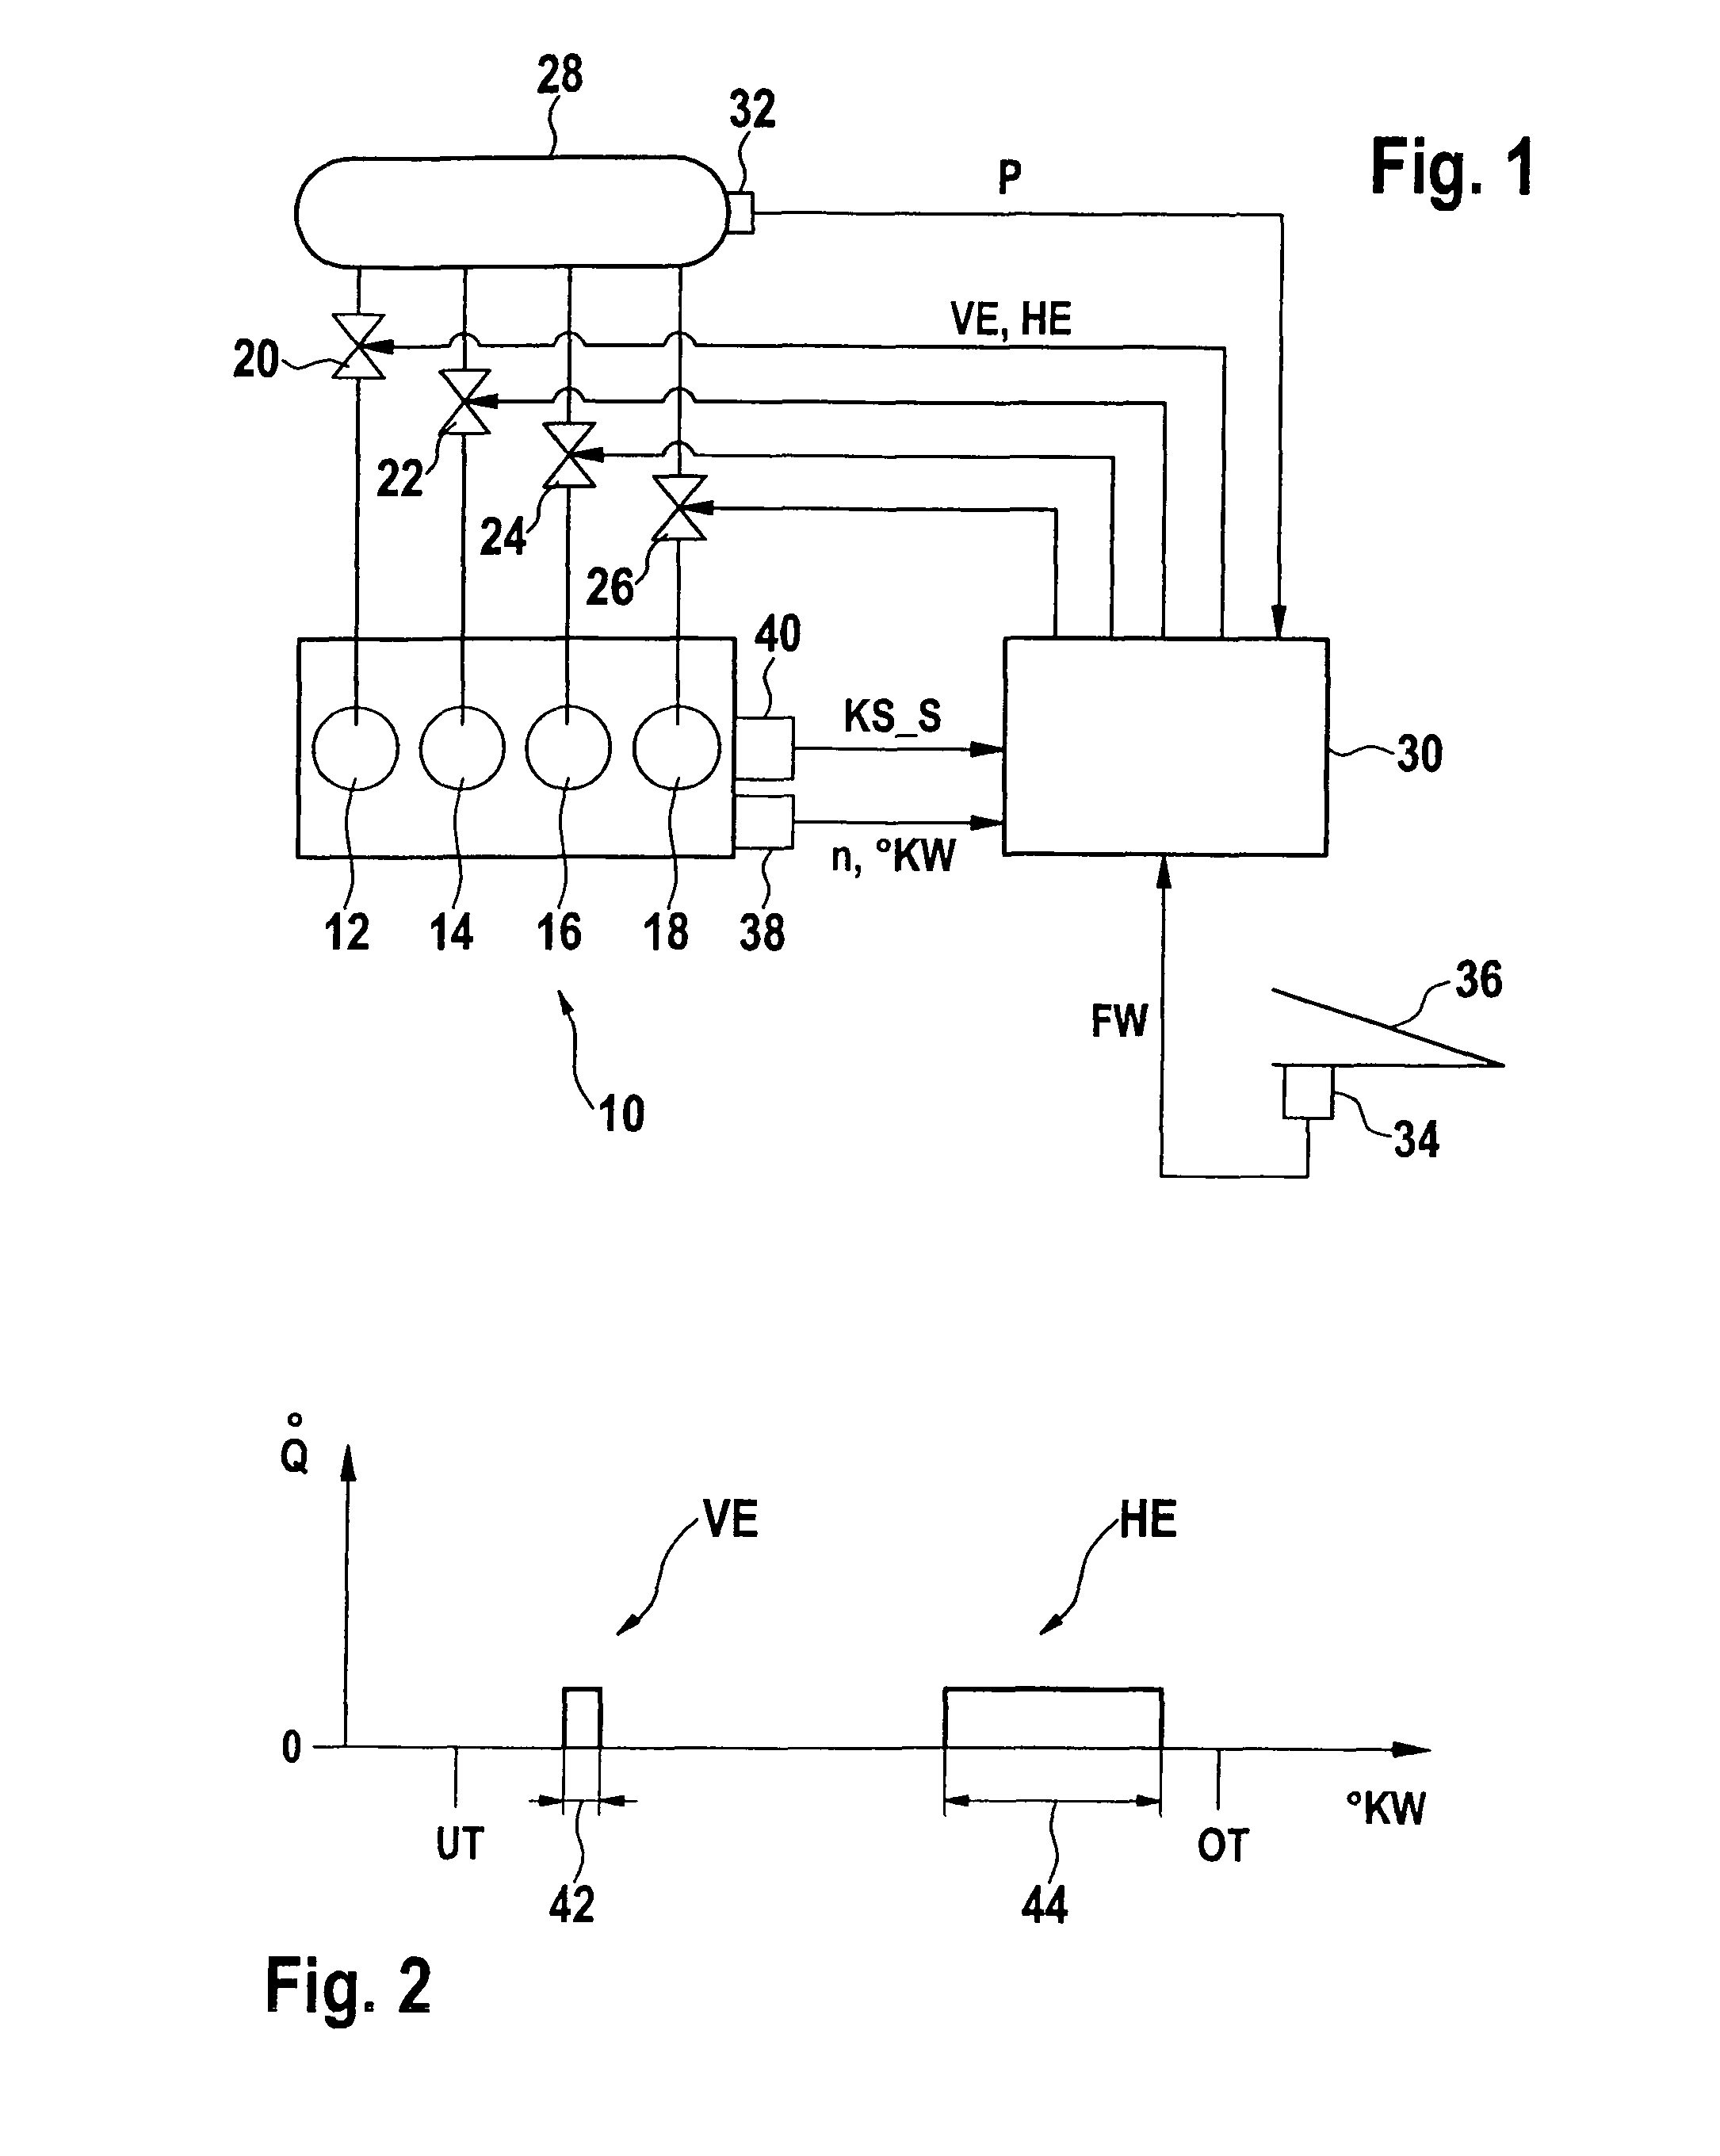 Method and control device for metering fuel to combustion chambers of an internal combustion engine